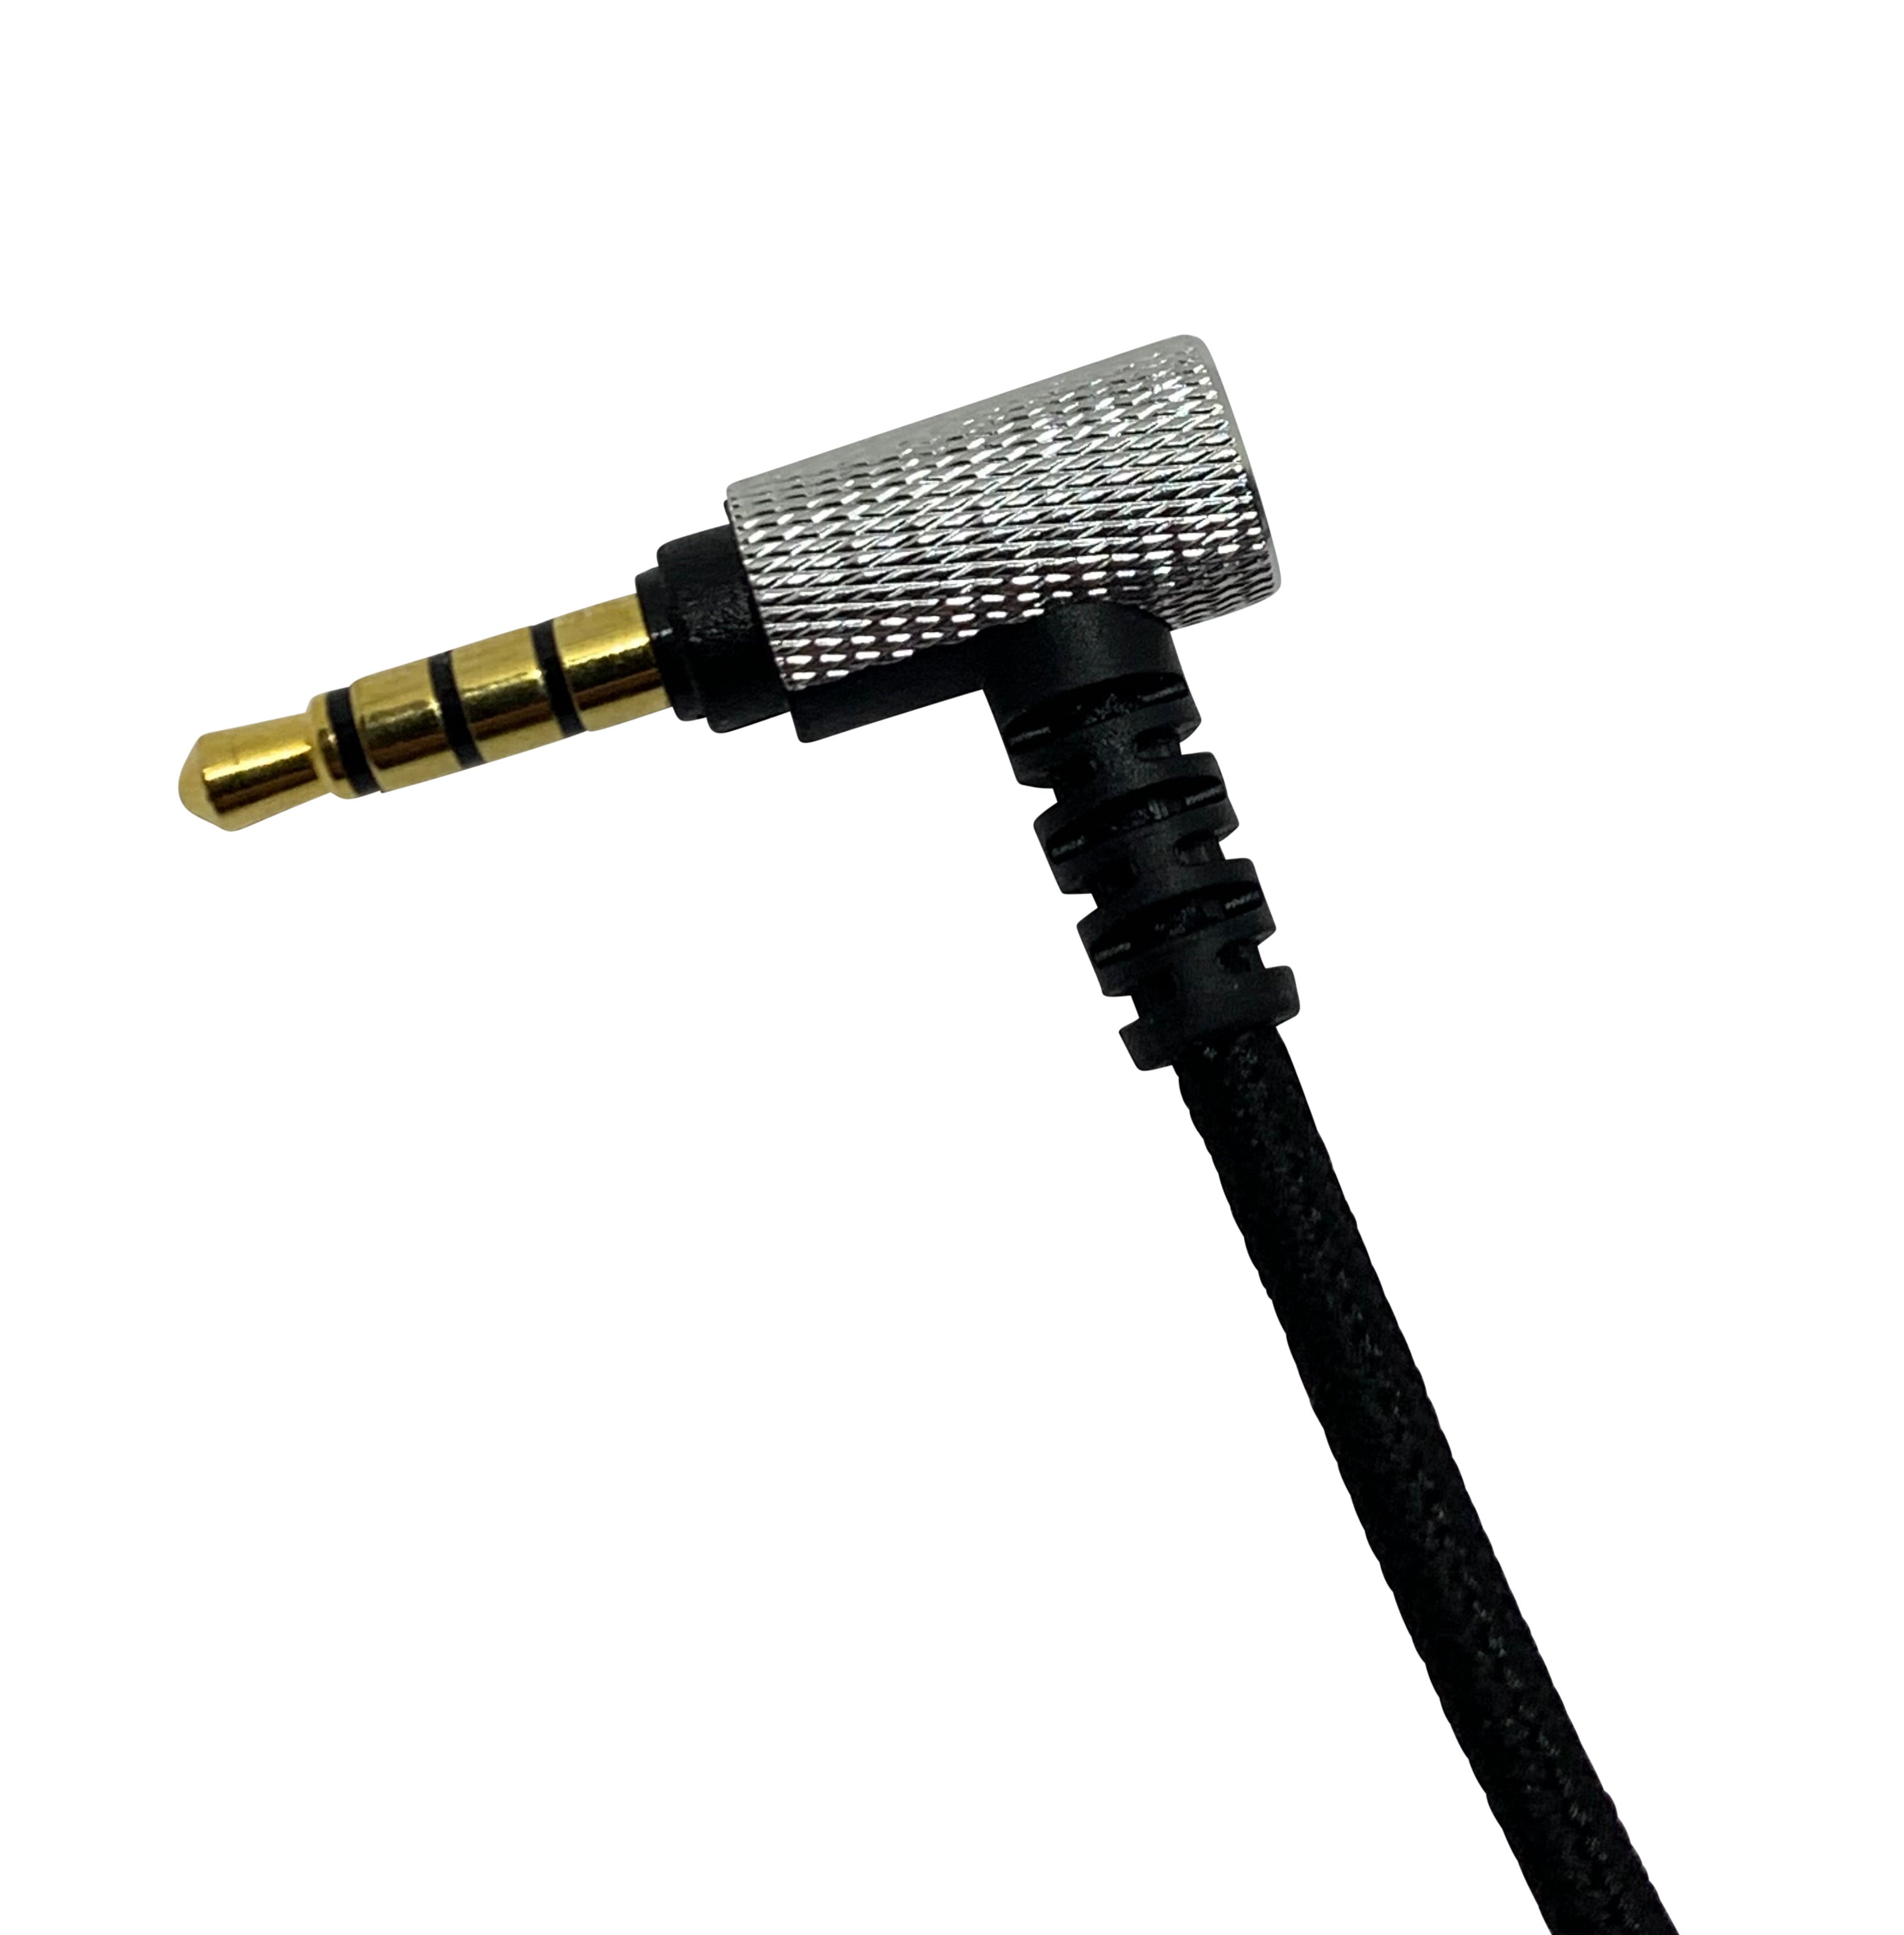 CentralSound Gaming Headset Mic Boom Adapter Cord for Beats Headphones - CentralSound